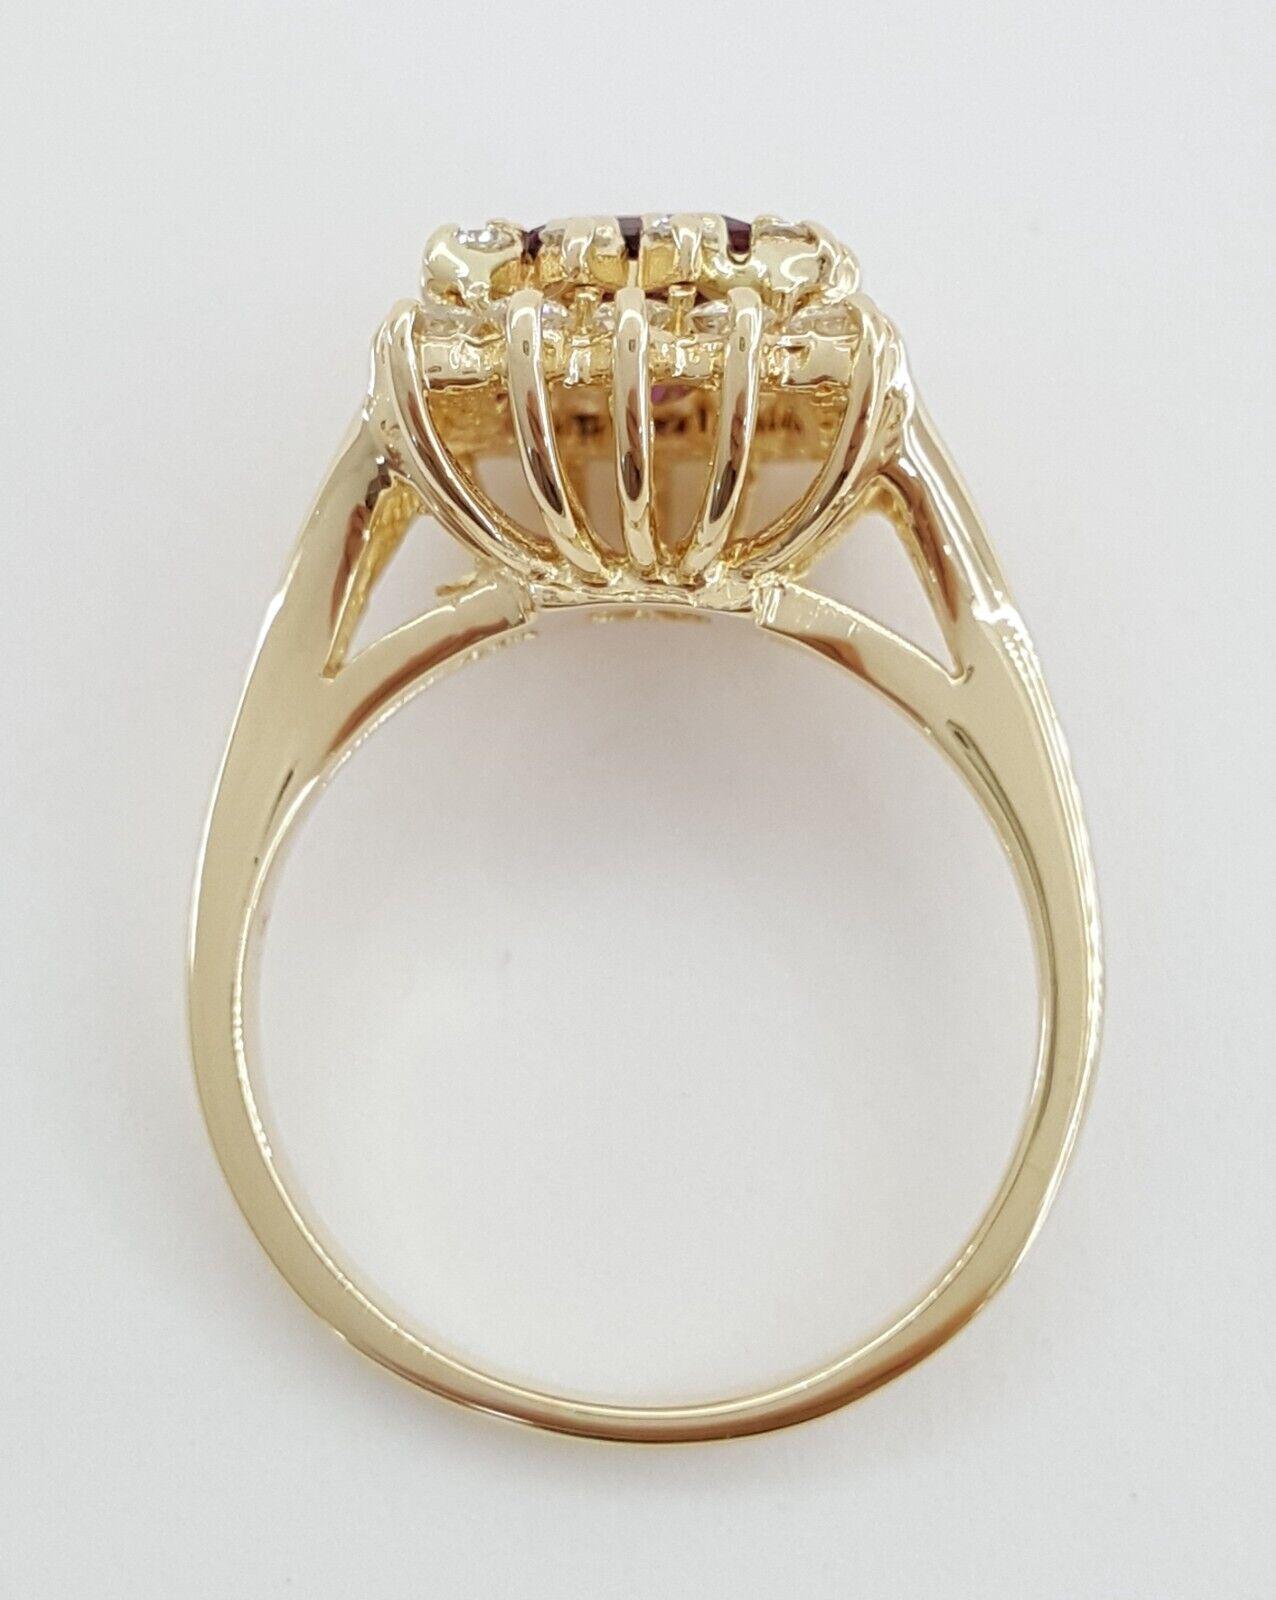 2.15 ct Total Weight Baguette Cut Garnet & Round Brilliant Cut Diamond Double Halo Crossover 14k Yellow Gold Engagement Ring.
The ring weighs 5.6 grams, size 6.75, the center stone is a Baguette / Emerald Cut Pink Tourmaline weighing approximately